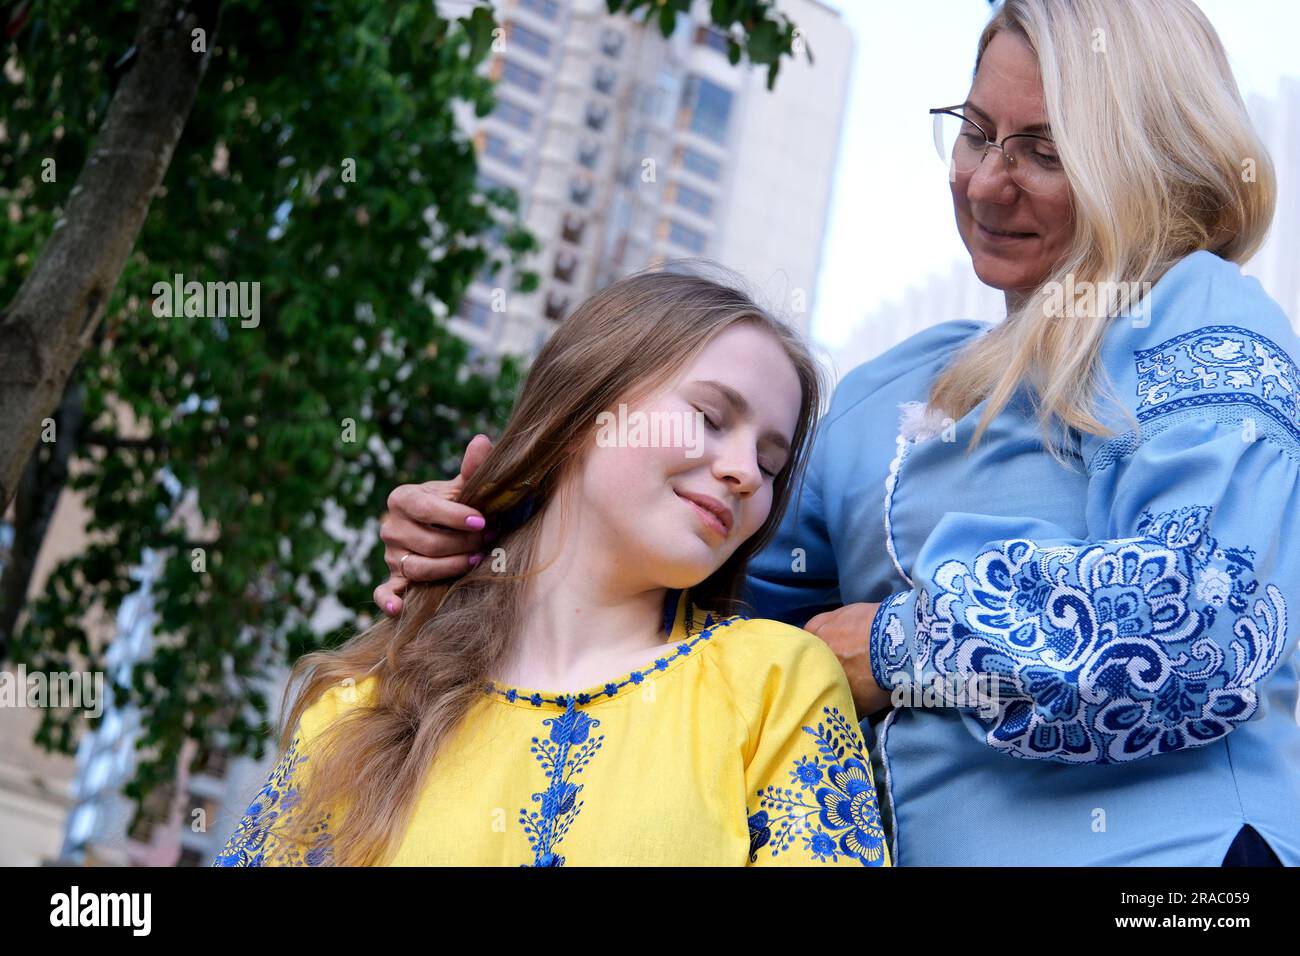 Happy senior woman enjoying in daughter's affection on Mother's day. mother and daughter in embroidered shirts blue and yellow blouse cute family relationship close-up portrait face outdoors Stock Photo